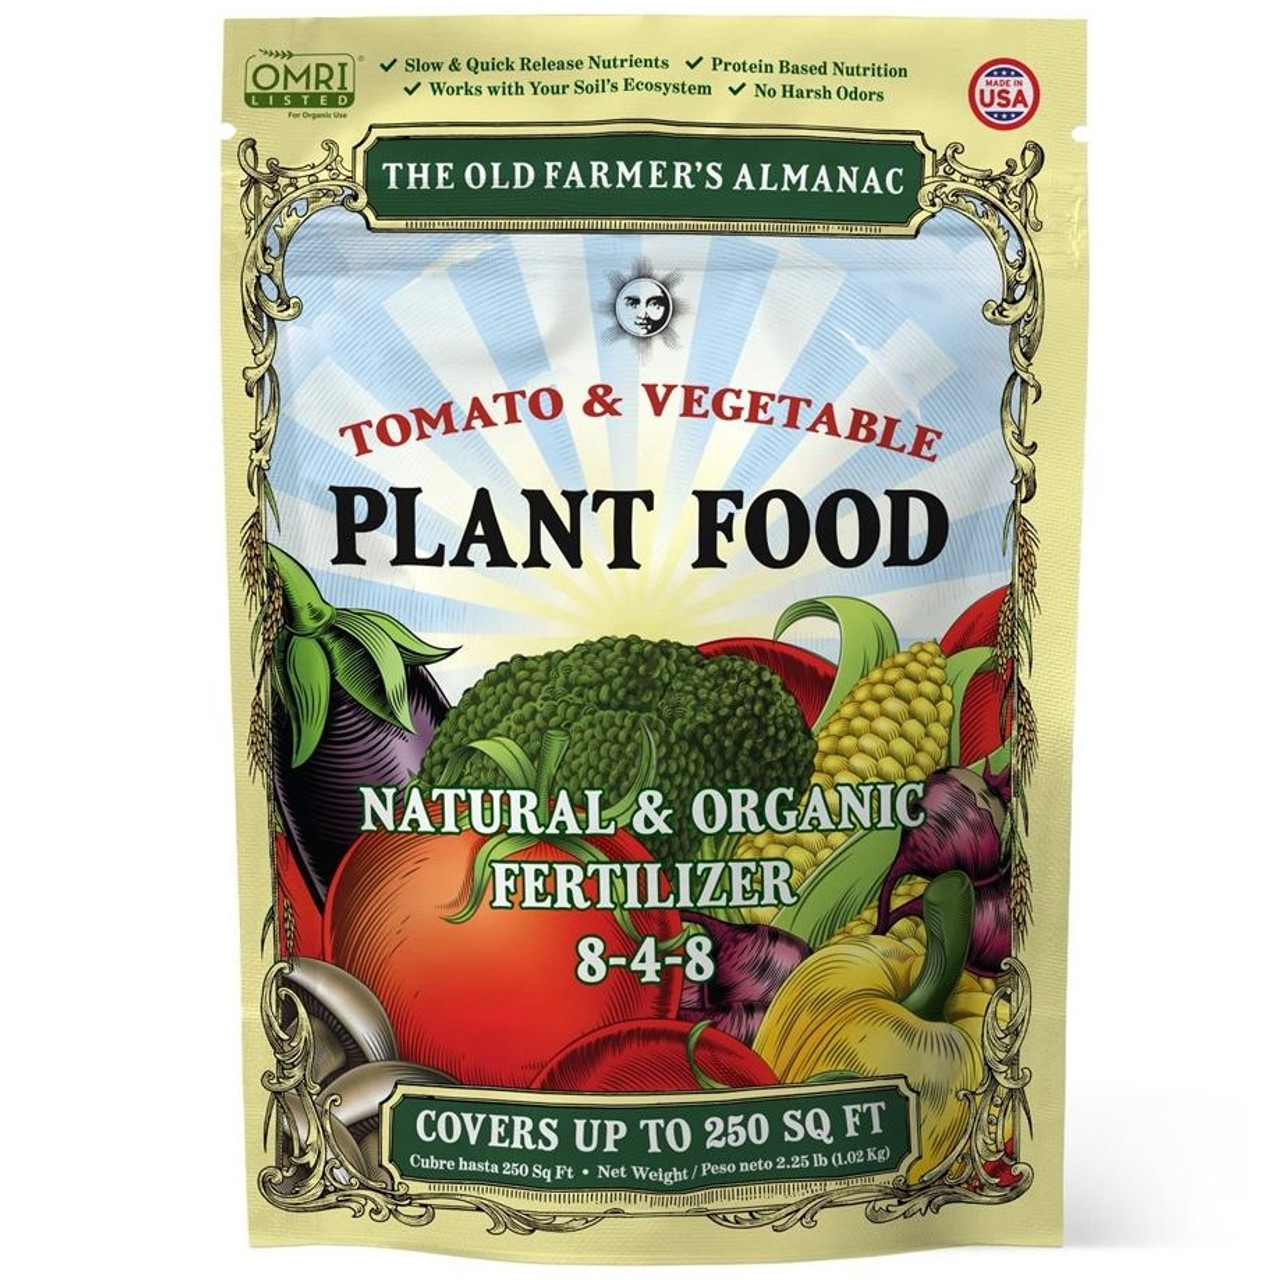 Almanac　Plant　Food　Farmer's　Tomato　Farmer's　The　Old　The　Old　Organic　Vegetable　Store